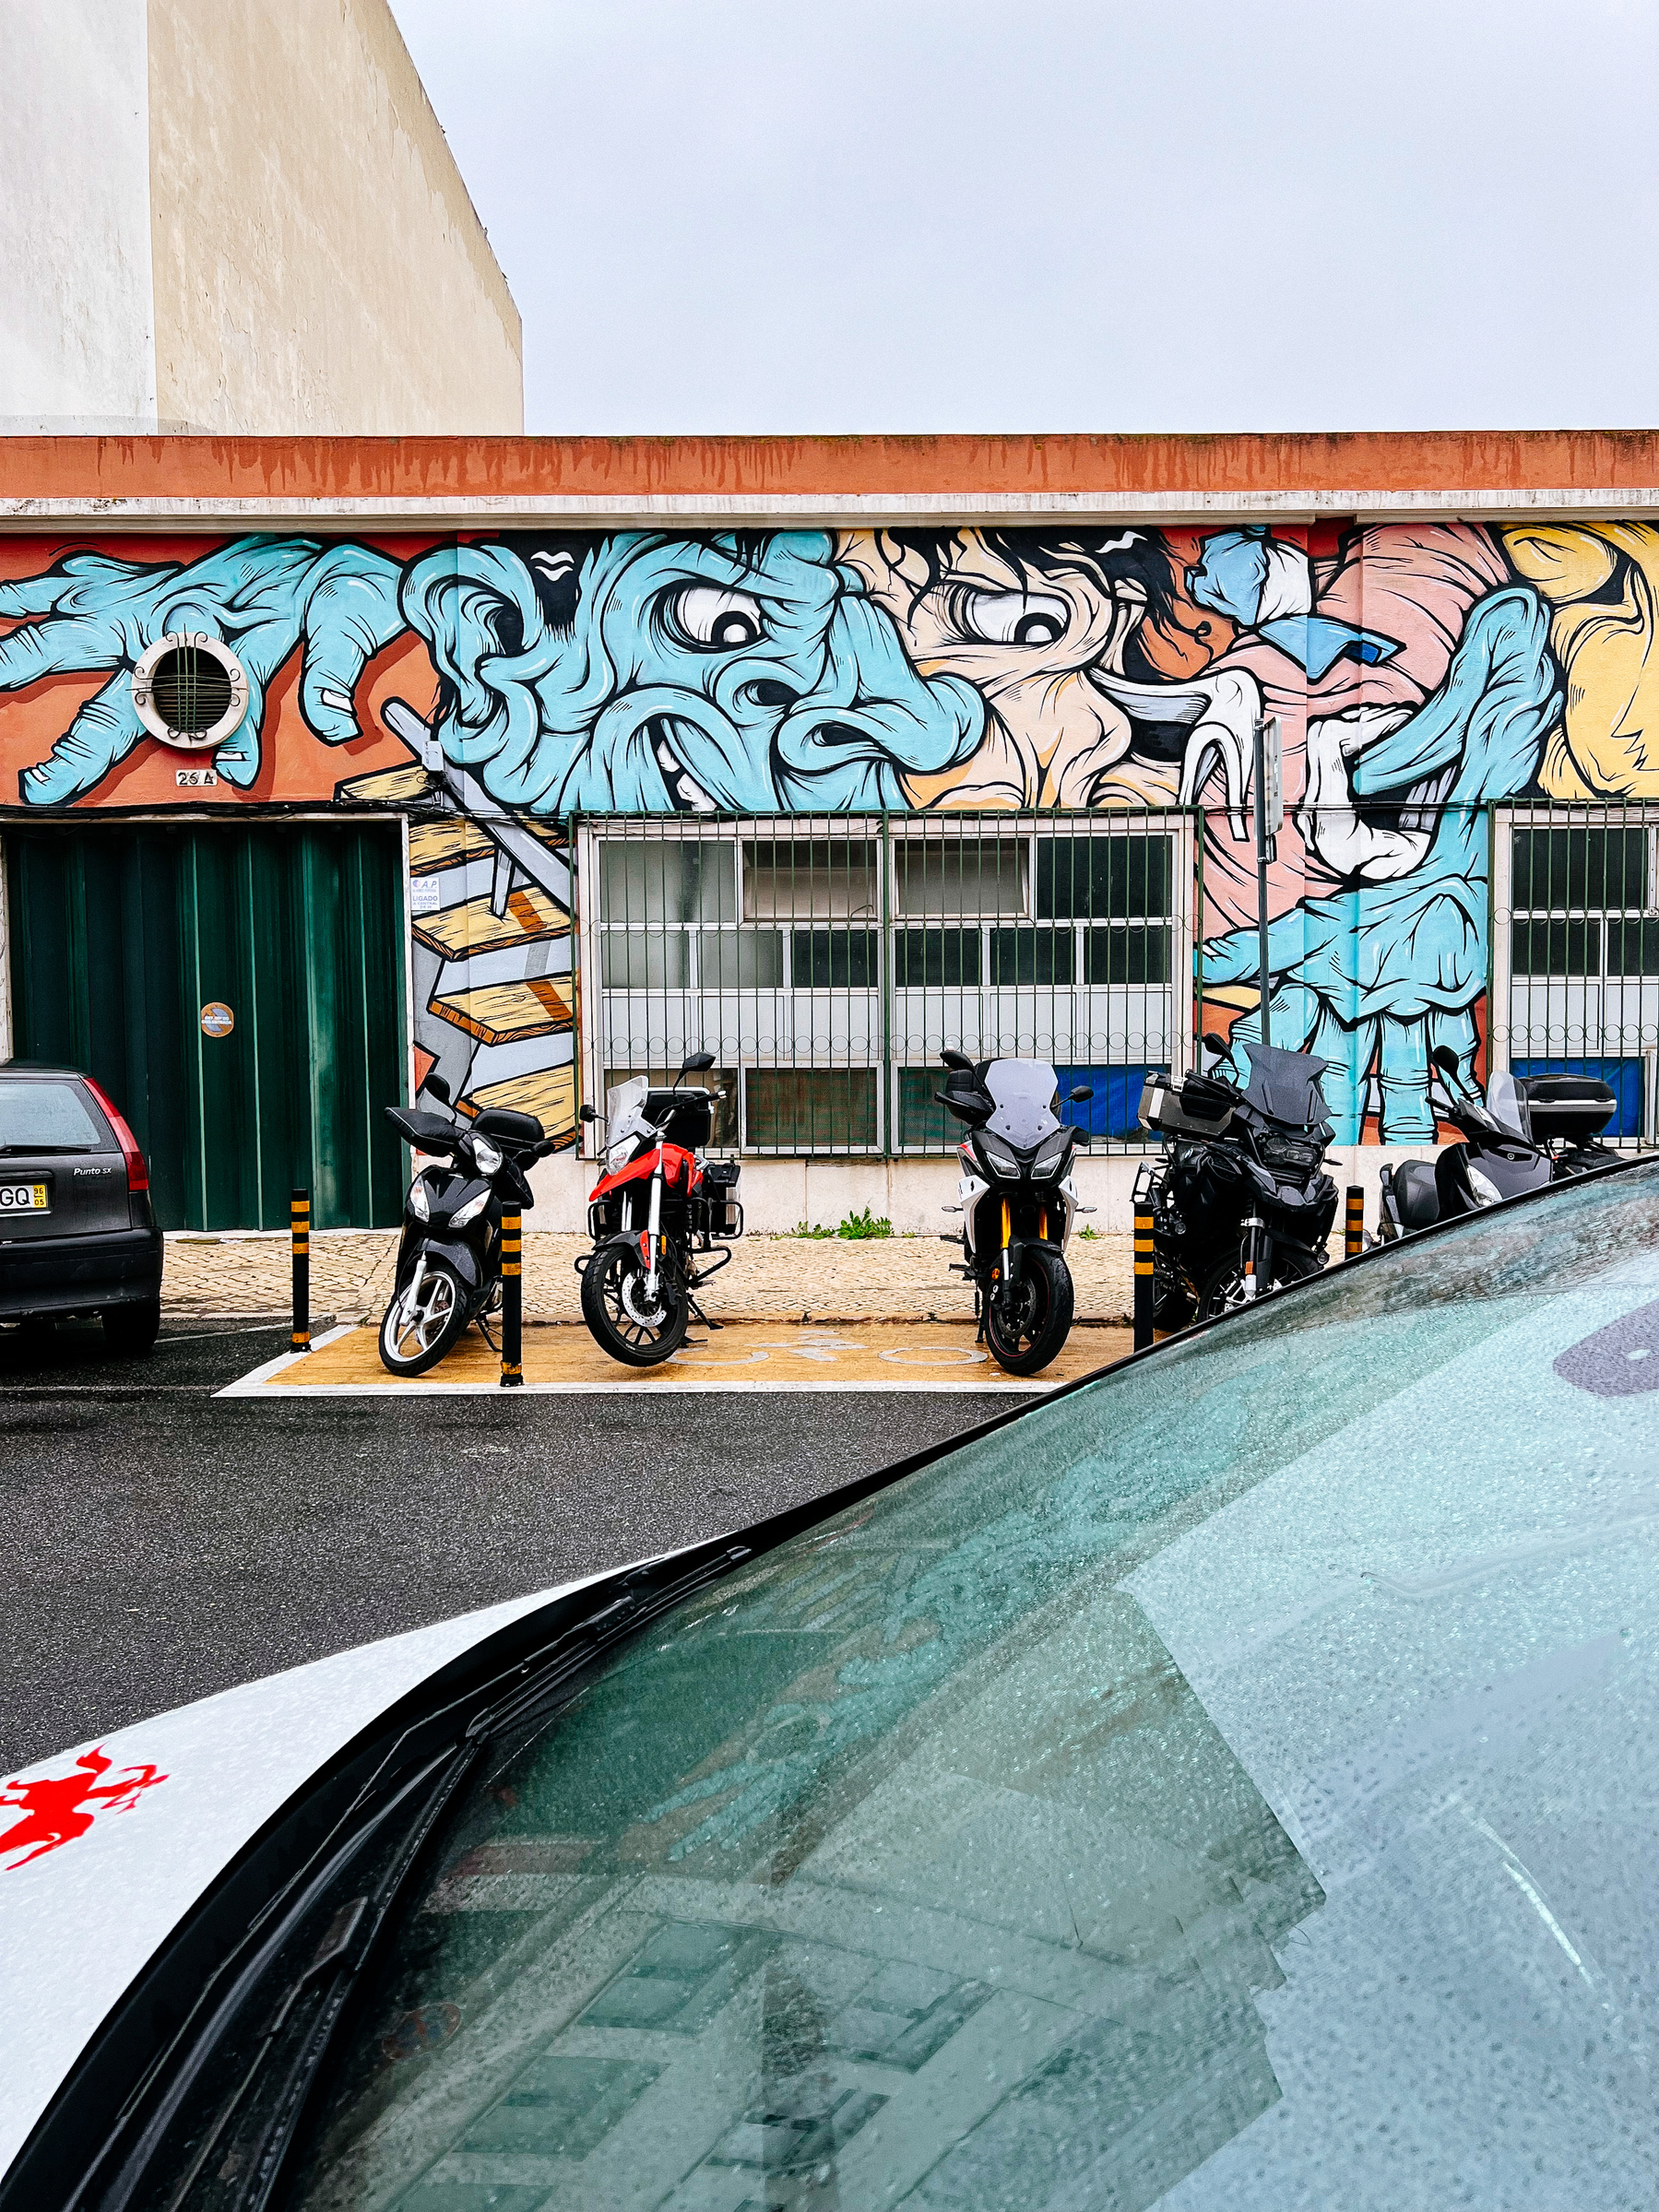 A few motorcycles are parked next to a building with some graffiti on the wall 